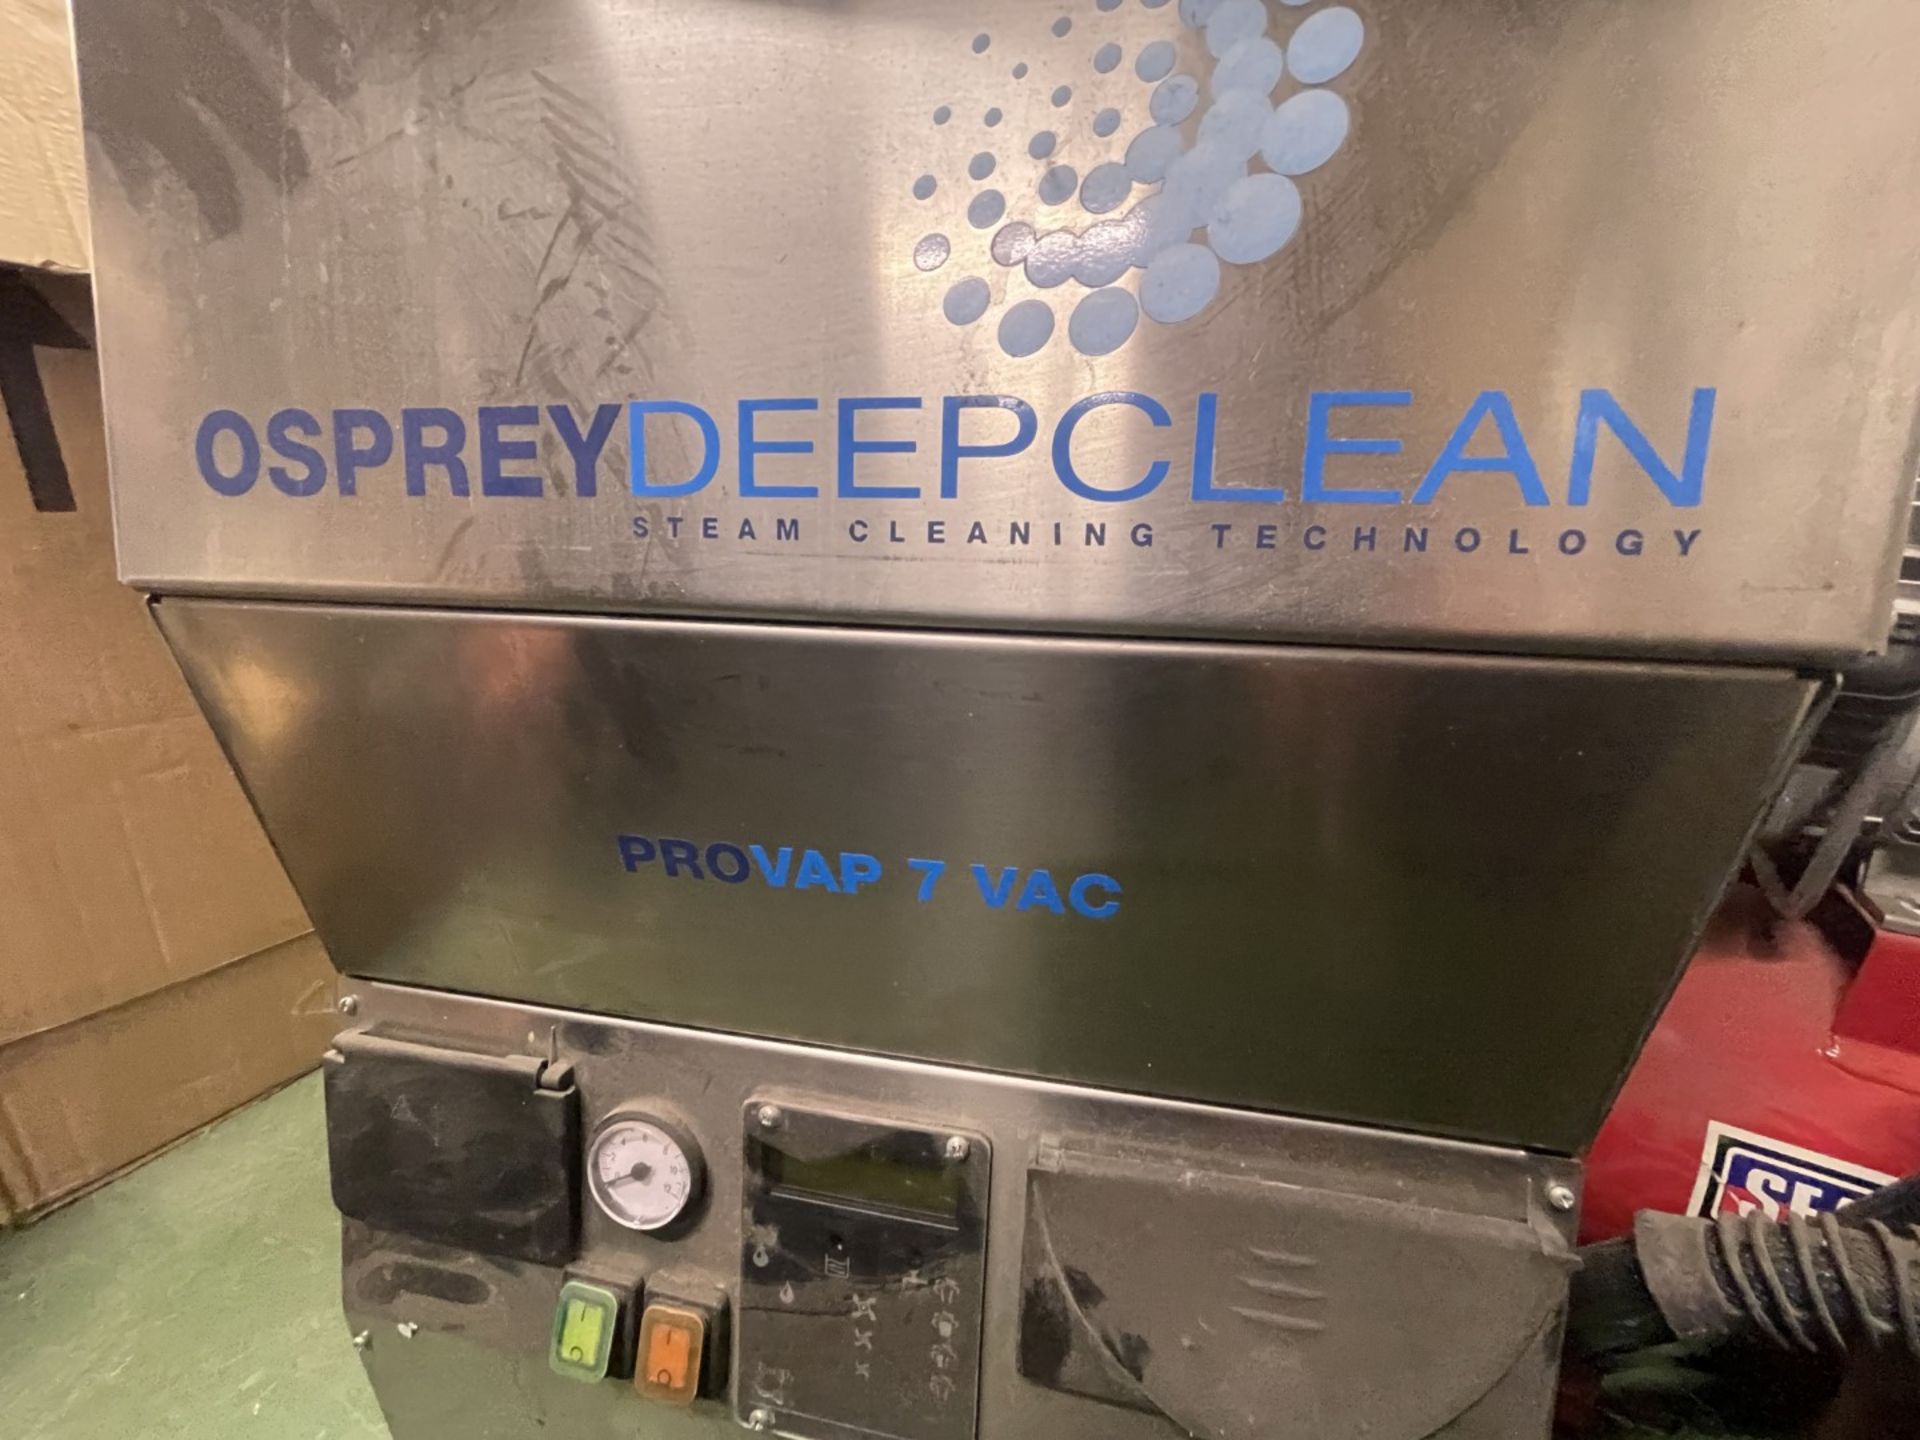 1 x Osprey Deep Clean Provap 7 VAC Steam Cleaner - Removed From a Working Environment - CL011 - Ref: - Image 6 of 9